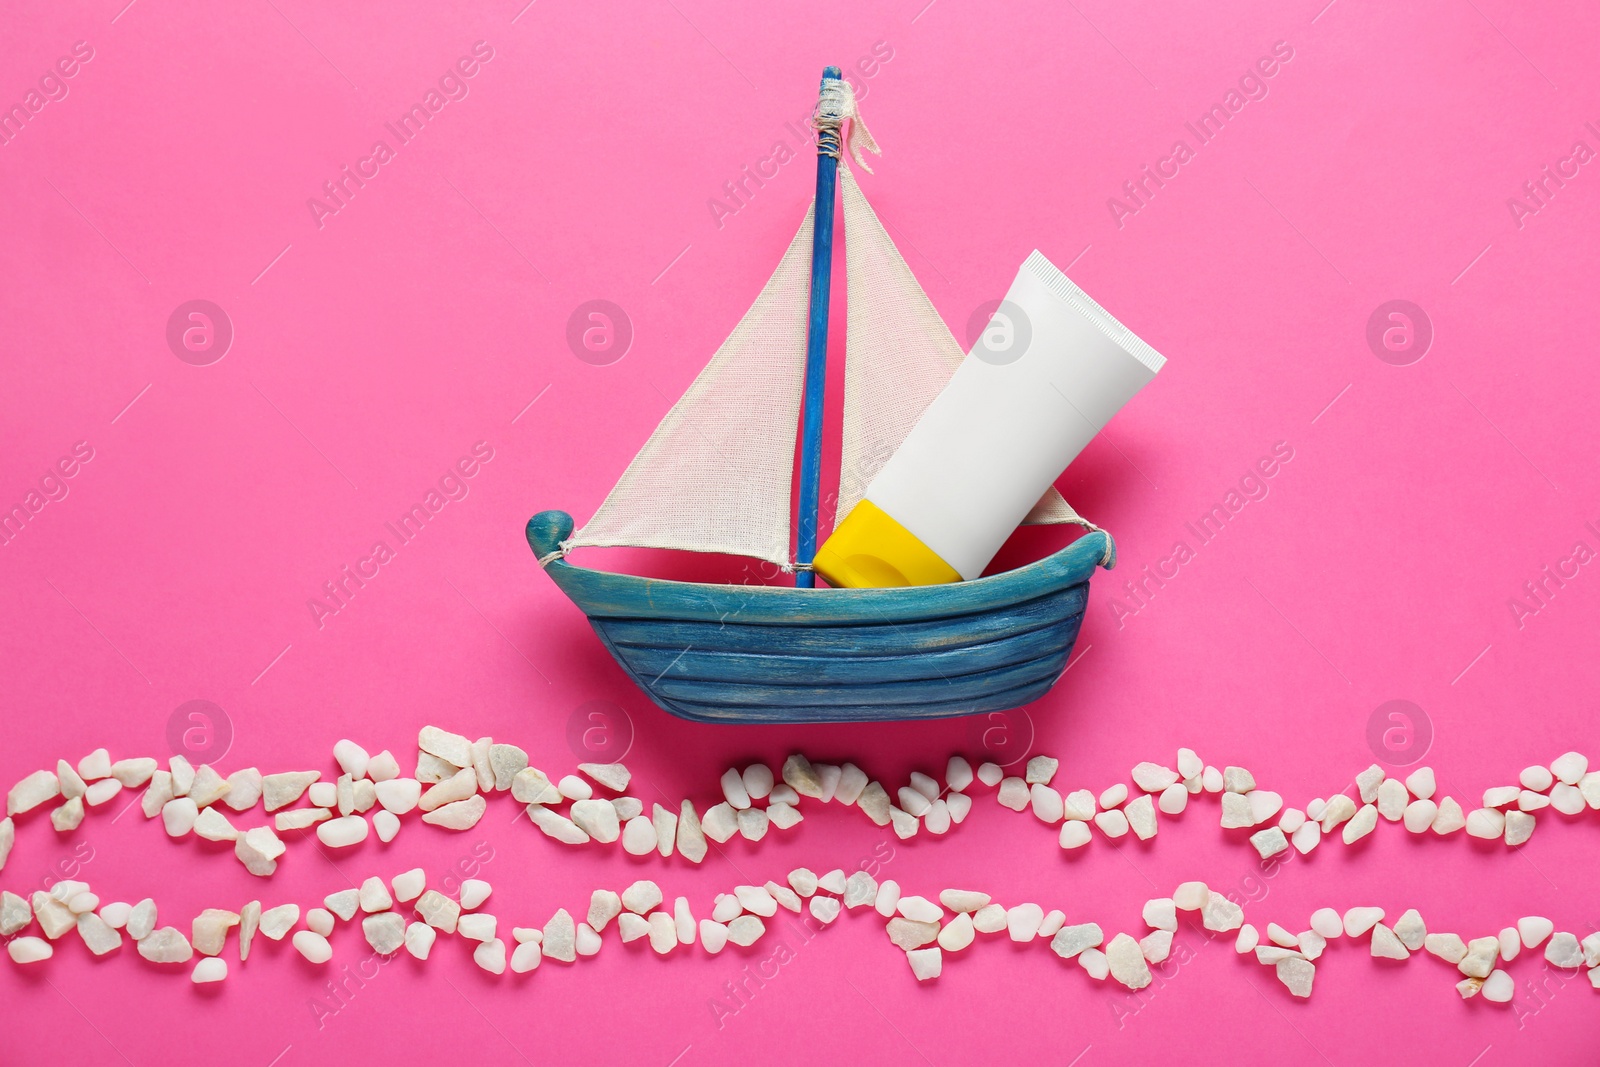 Photo of Suntan cream in toy sailboat and white marble pebbles on pink background, flat lay